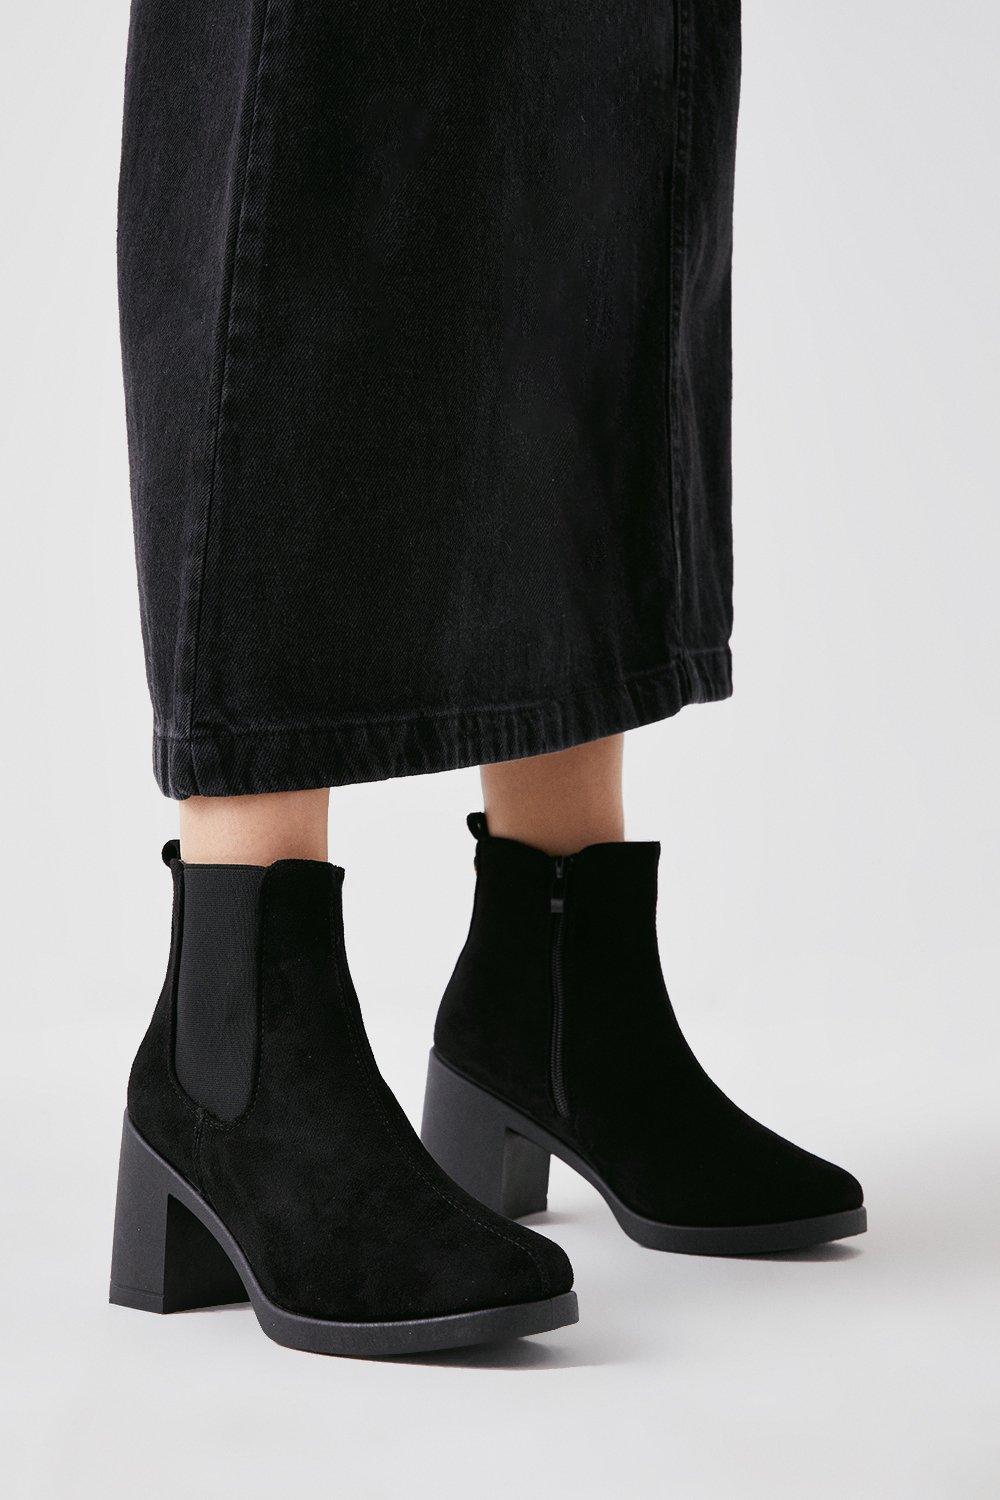 Women’s Alo Casual Heeled Chelsea Boots - black - 5